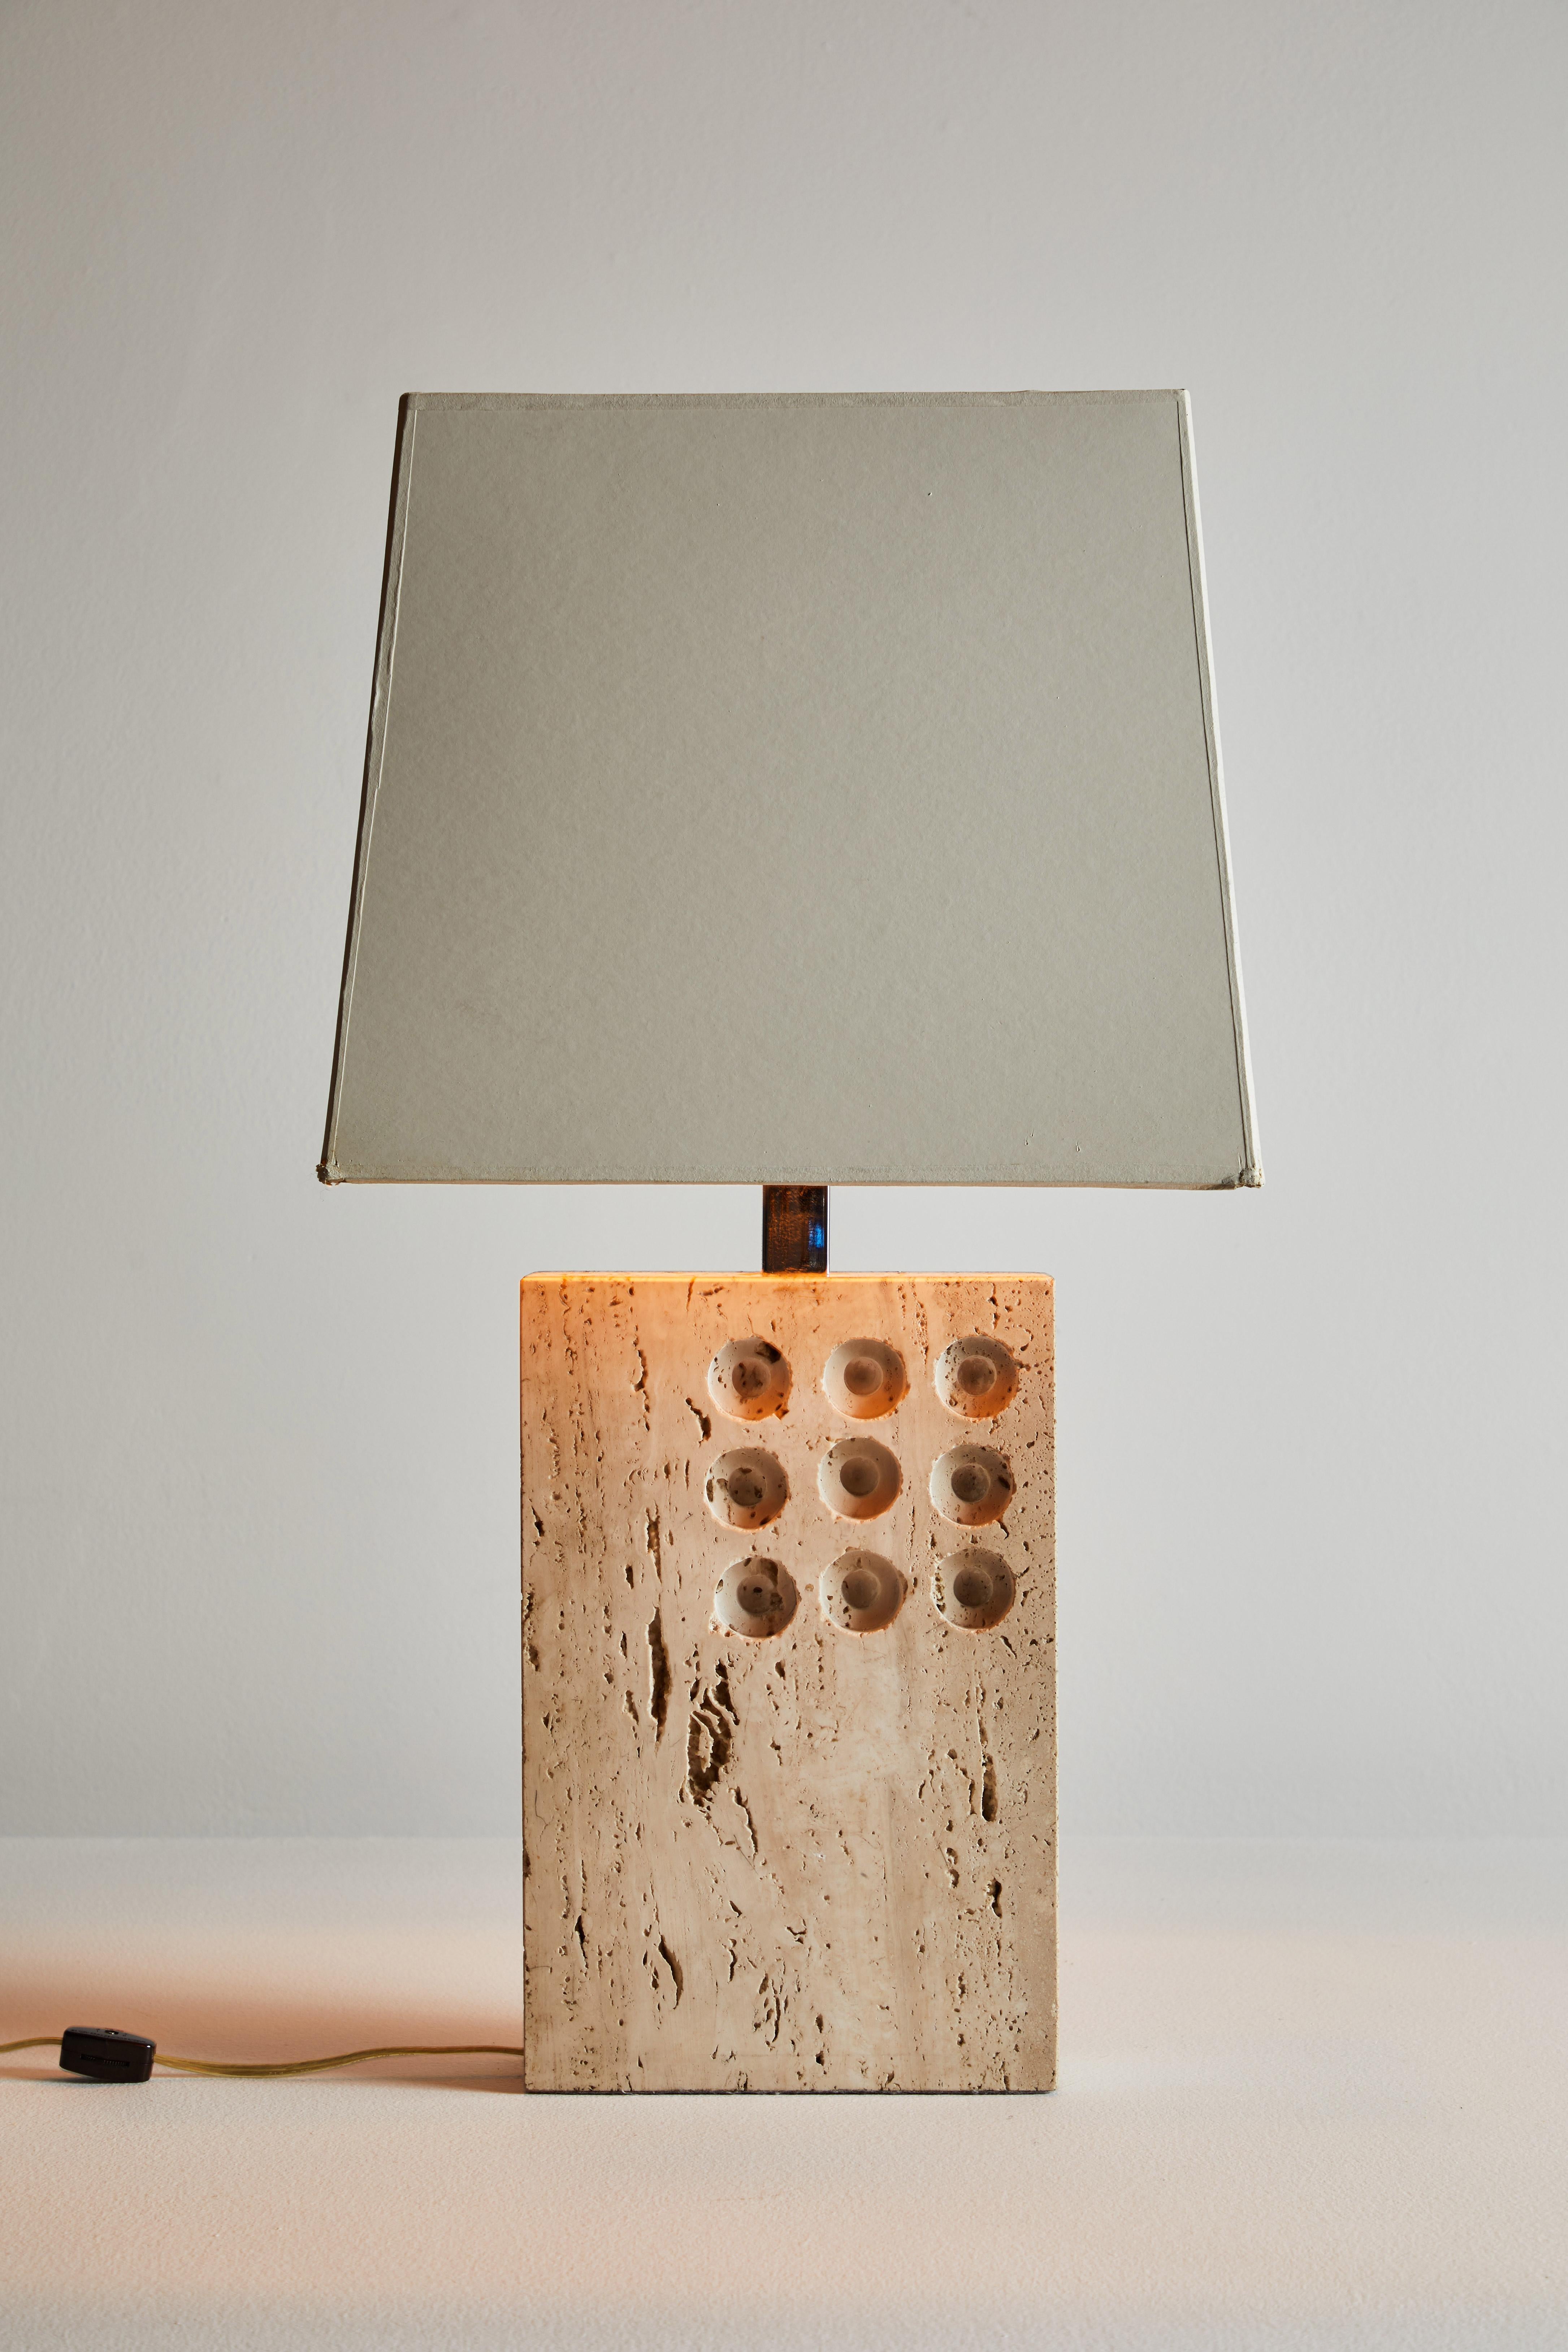 Travertine Table Lamp by Raymor. Manufactured in Italy, circa 1970s. Original lacquered paper shade with travertine base. Original cord. Takes one E27 75w maximum bulb. Bulbs provided as a one time courtesy.